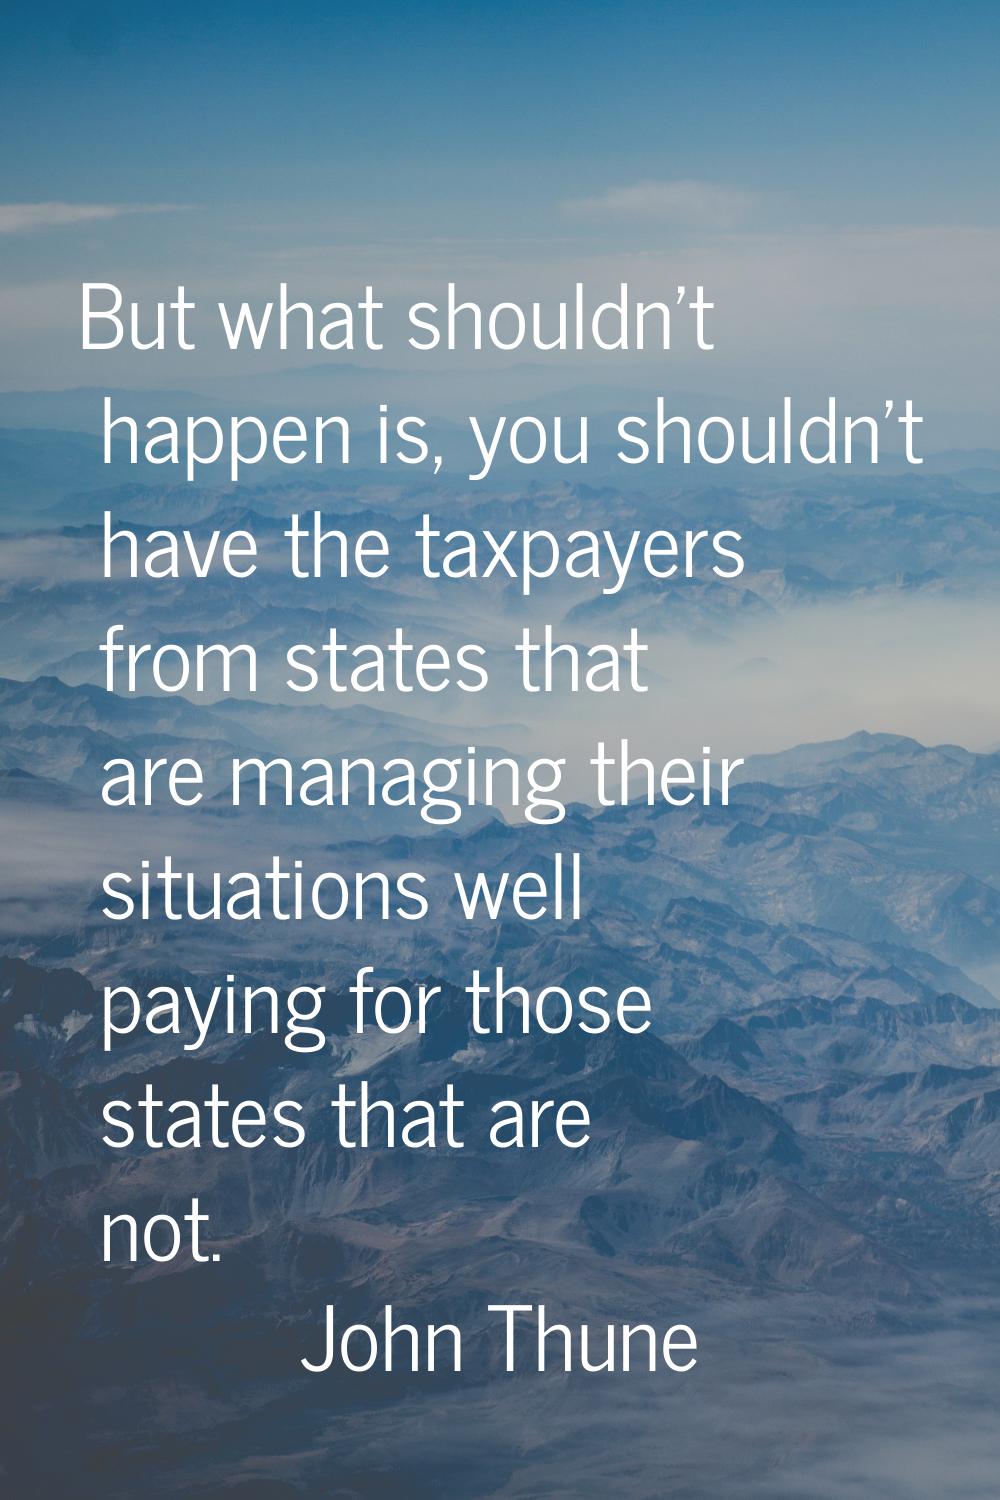 But what shouldn't happen is, you shouldn't have the taxpayers from states that are managing their 